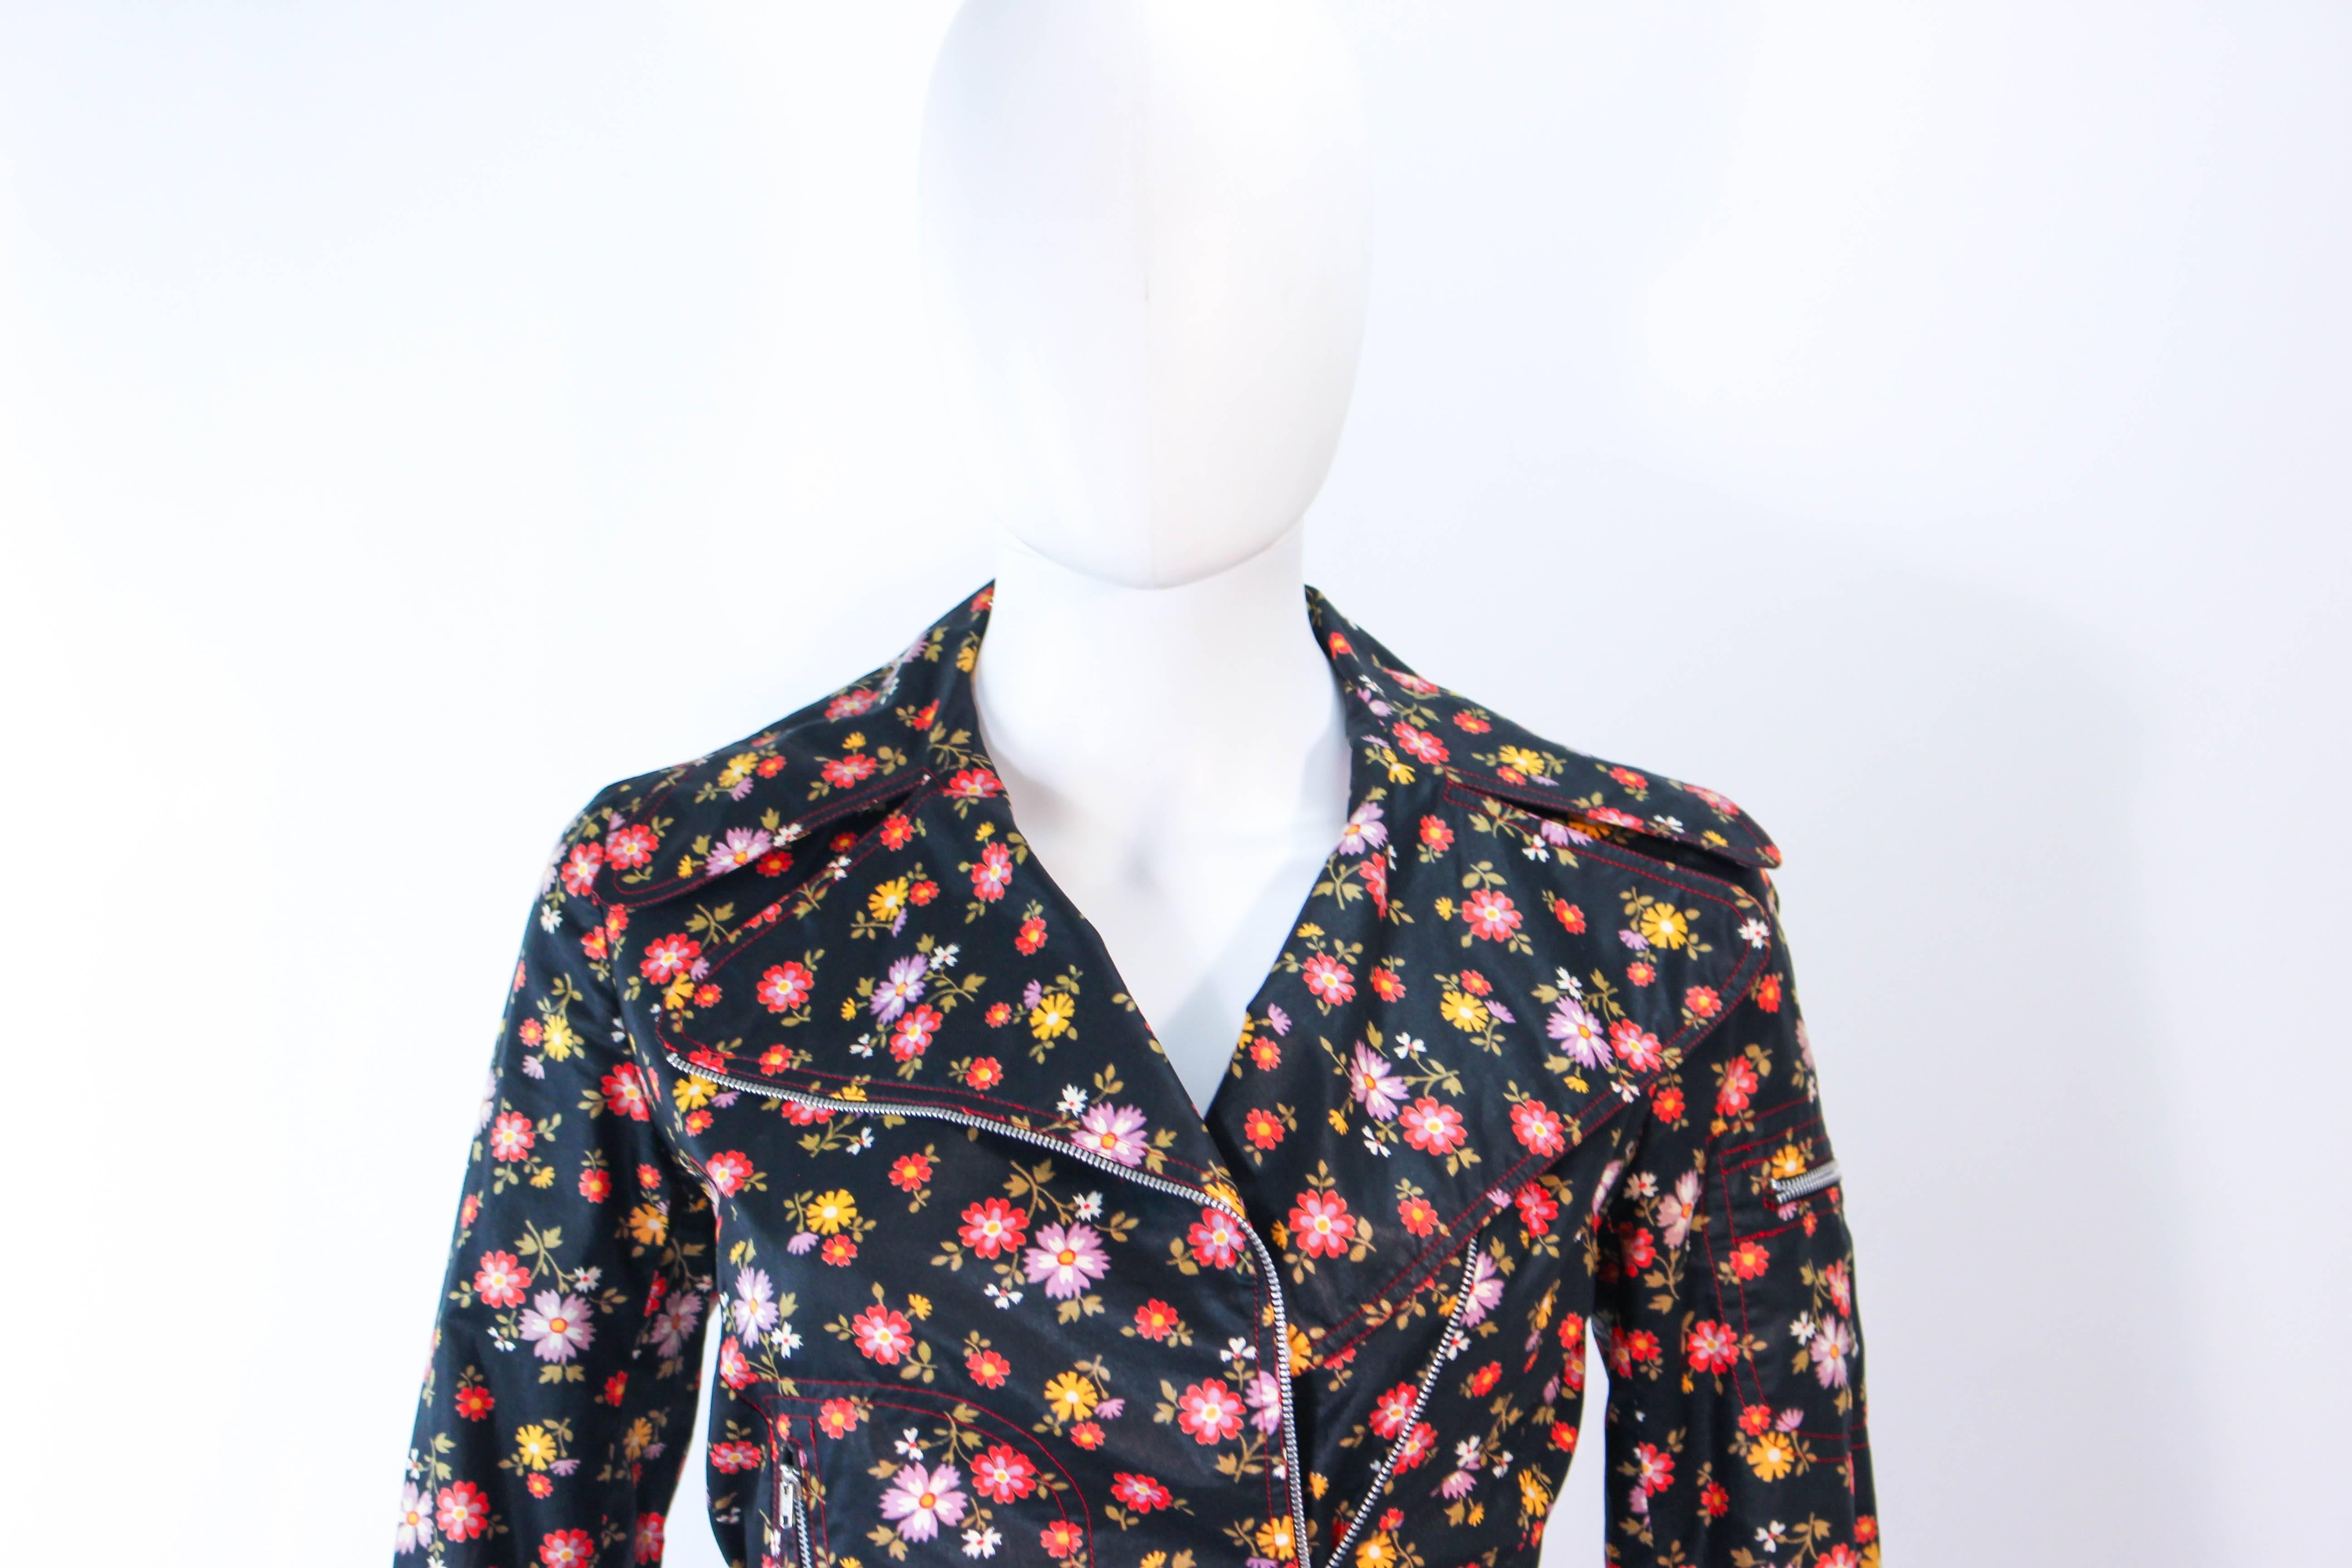 This Joseph Magin set is composed of a floral print waxed cotton. The jacket features an asymmetrical zipper closure with zippers at the pockets and sleeves. The pants have a classic slack style with zipper closure. In excellent vintage